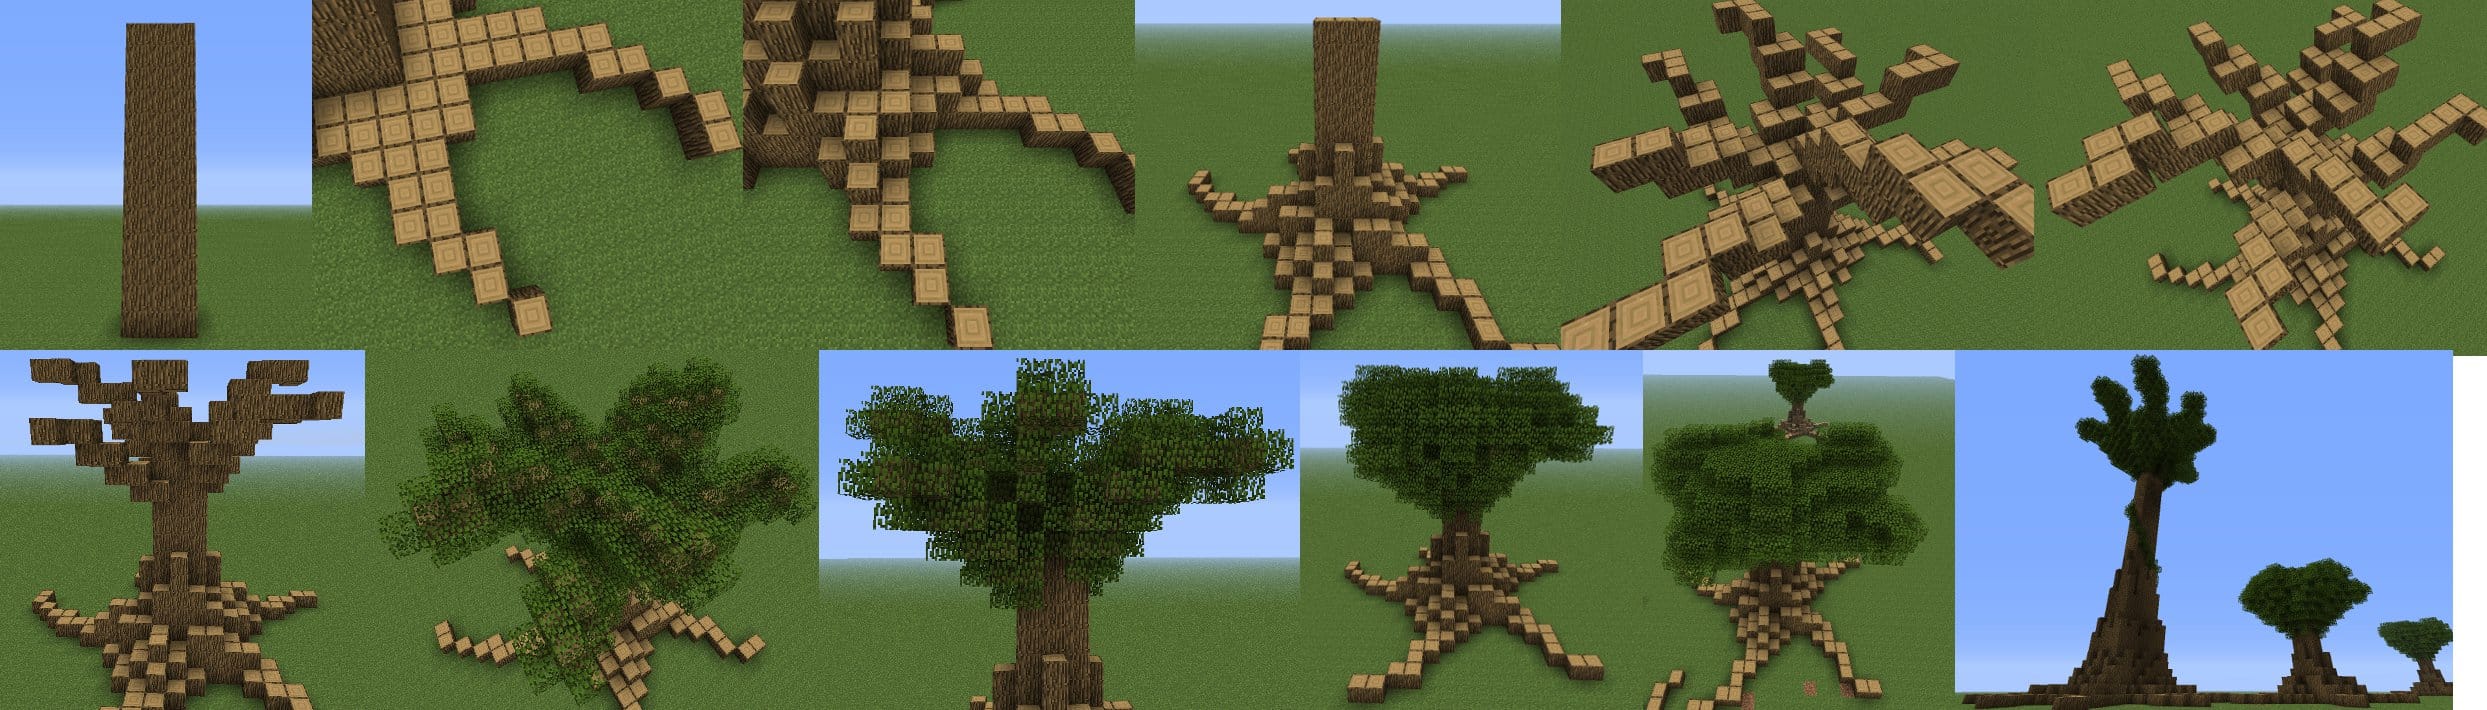 How to Build Big Trees in Minecraft - Game Guide